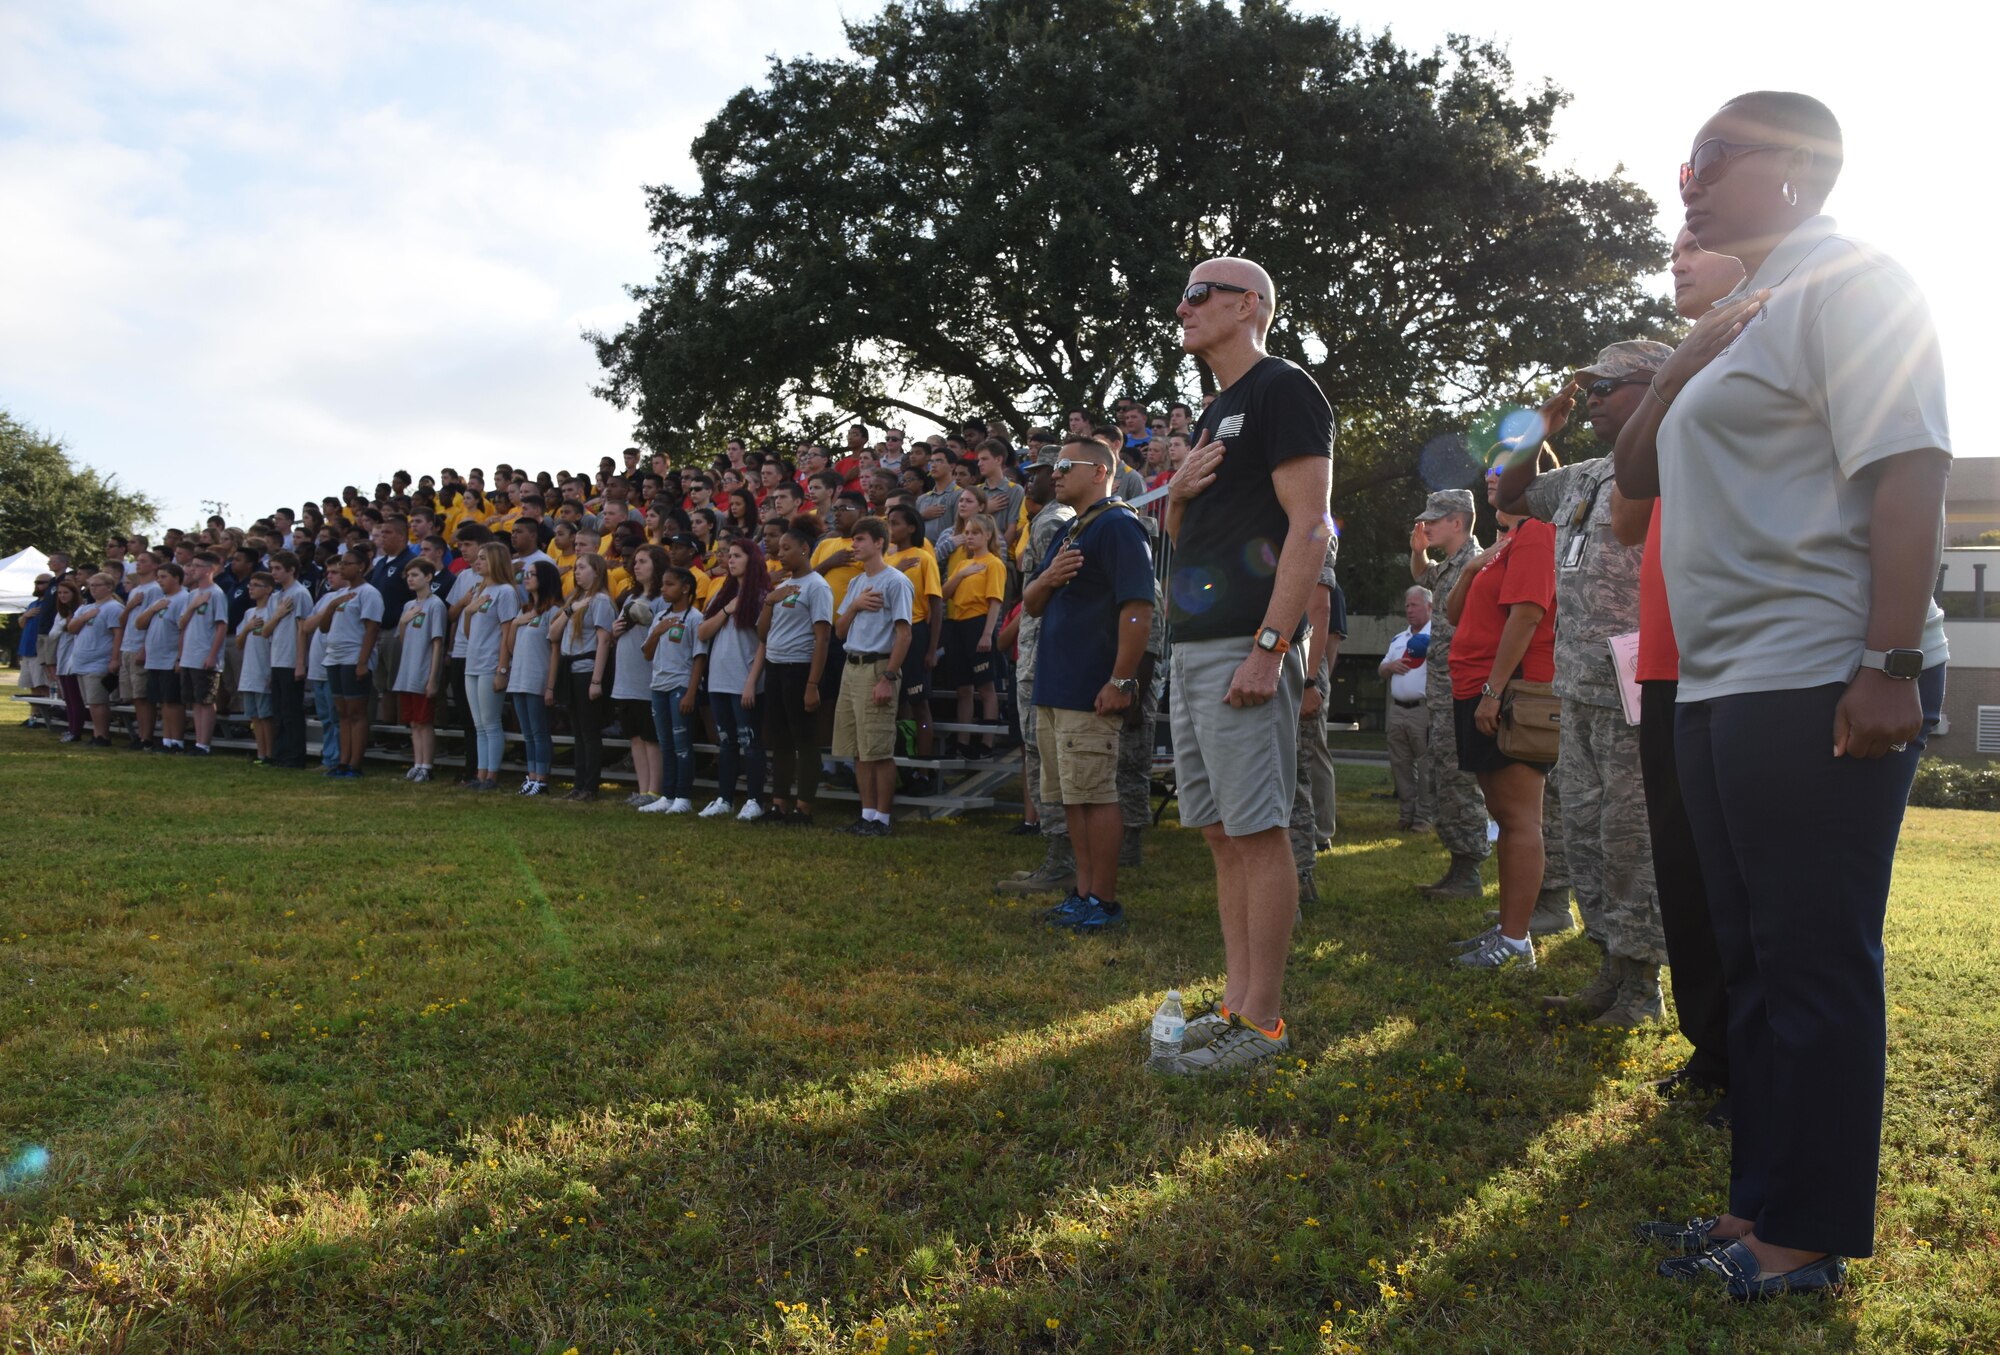 Keesler personnel and local high school Junior ROTC cadets place their hands over their hearts during the singing of the national anthem at the Science, Technology, Engineering and Mathematics Diversity Outreach Day Sept. 15, 2017, on Keesler Air Force Base, Mississippi. The event consisted of 10 Mississippi gulf coast high school Junior ROTC units viewing an 81st Security Forces Squadron military working dog demonstration and receiving information about Air Force opportunities and accession requirements with an emphasis on STEM. They also competed in several team building activities. (U.S. Air Force photo by Kemberly Groue)